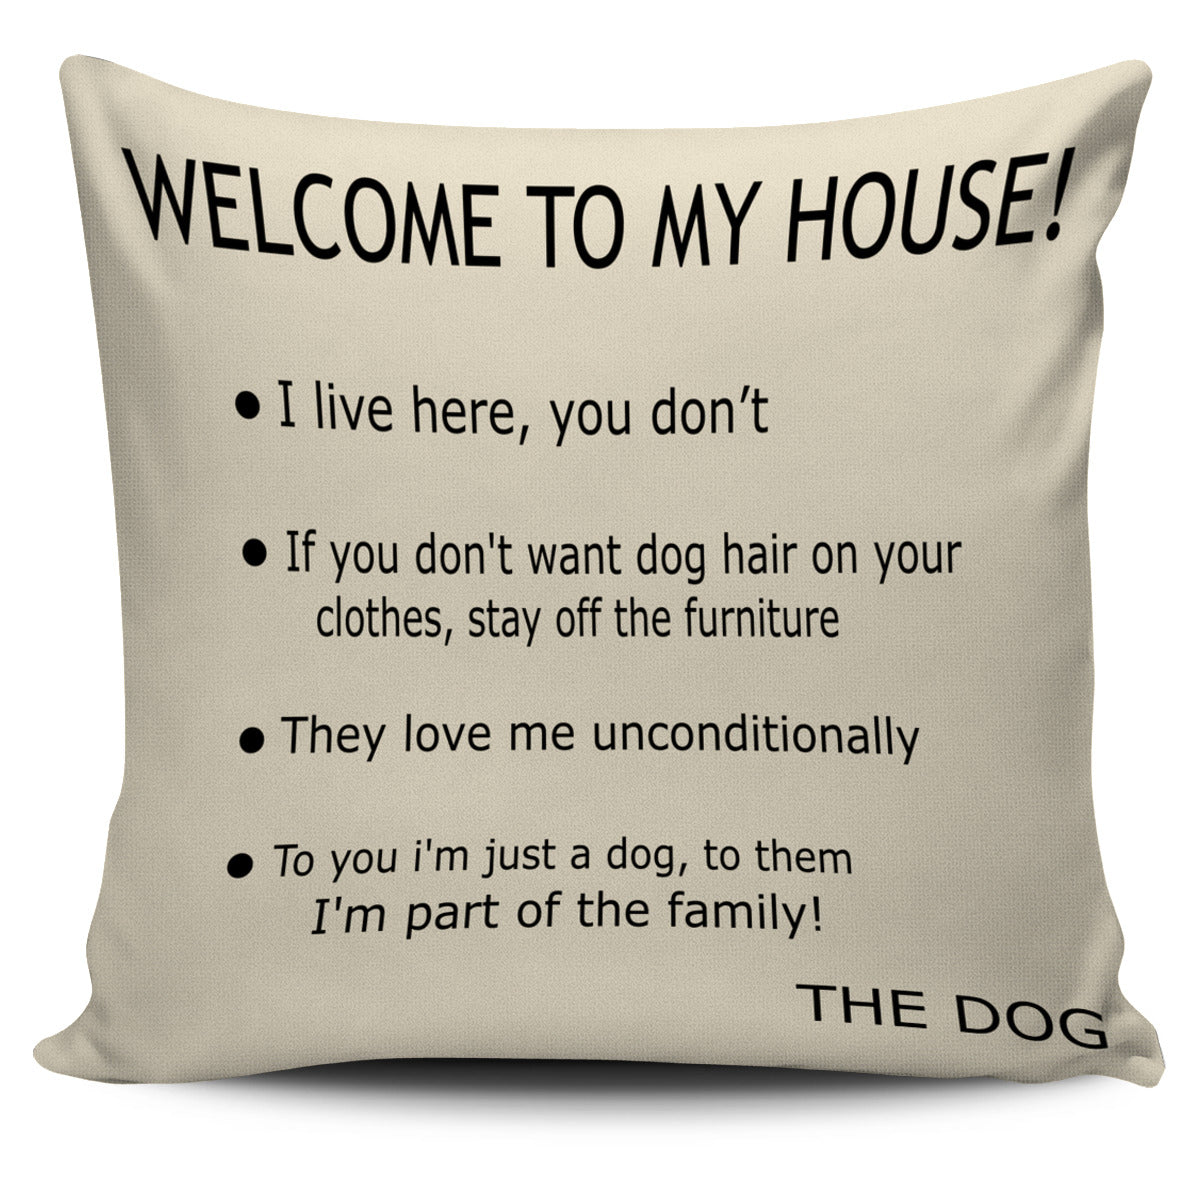 Pillow Cover - Dog's House - Tan